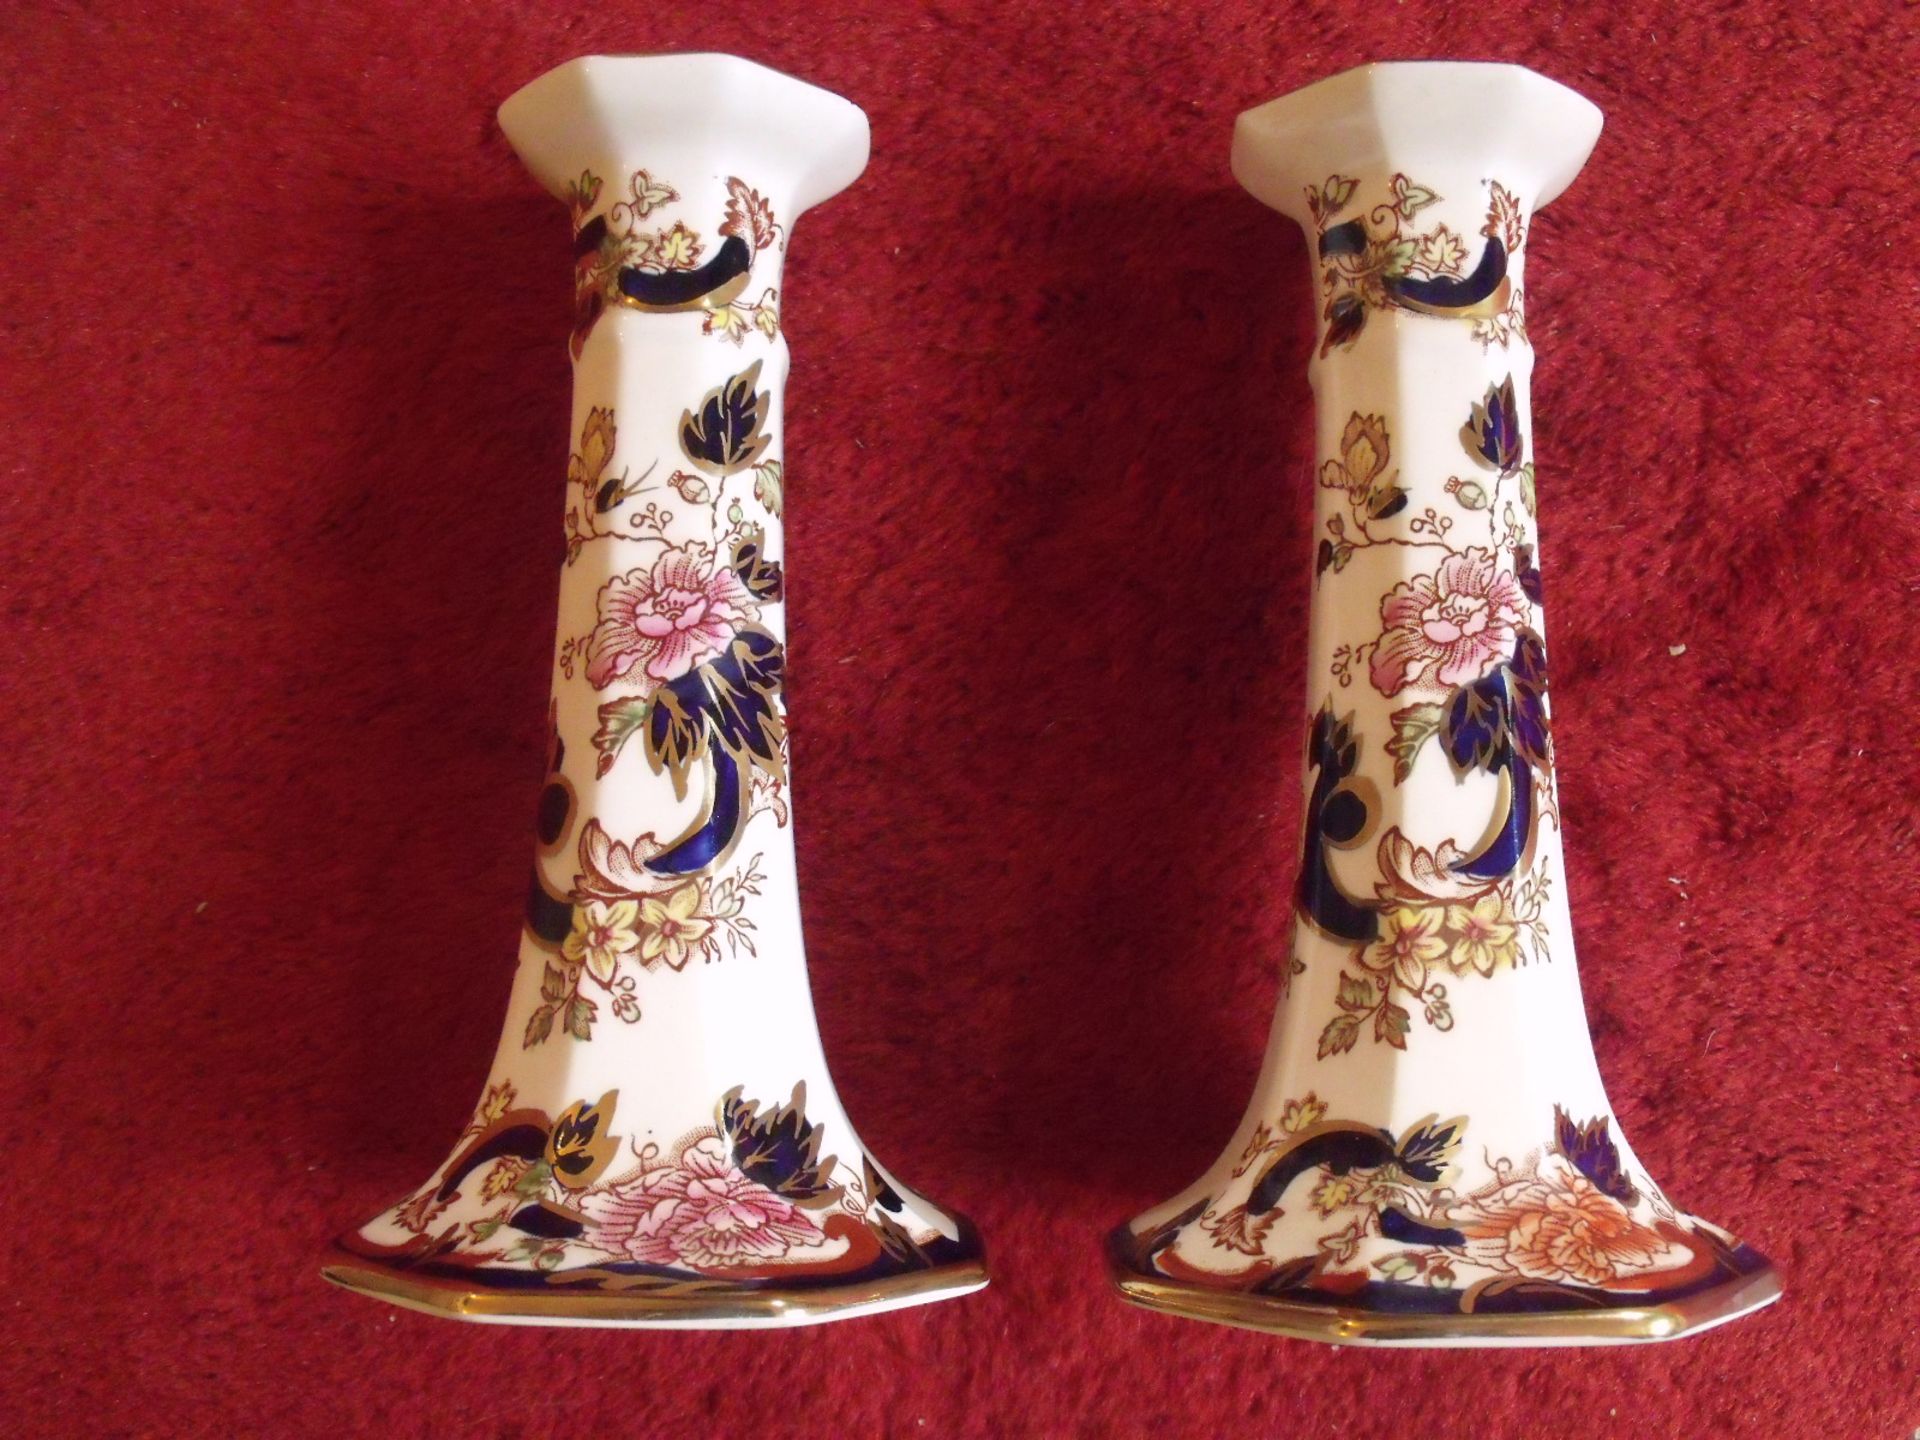 Pair of Masons Mandalay Candlesticks size 170mm high very good condition from a private - No Reserve